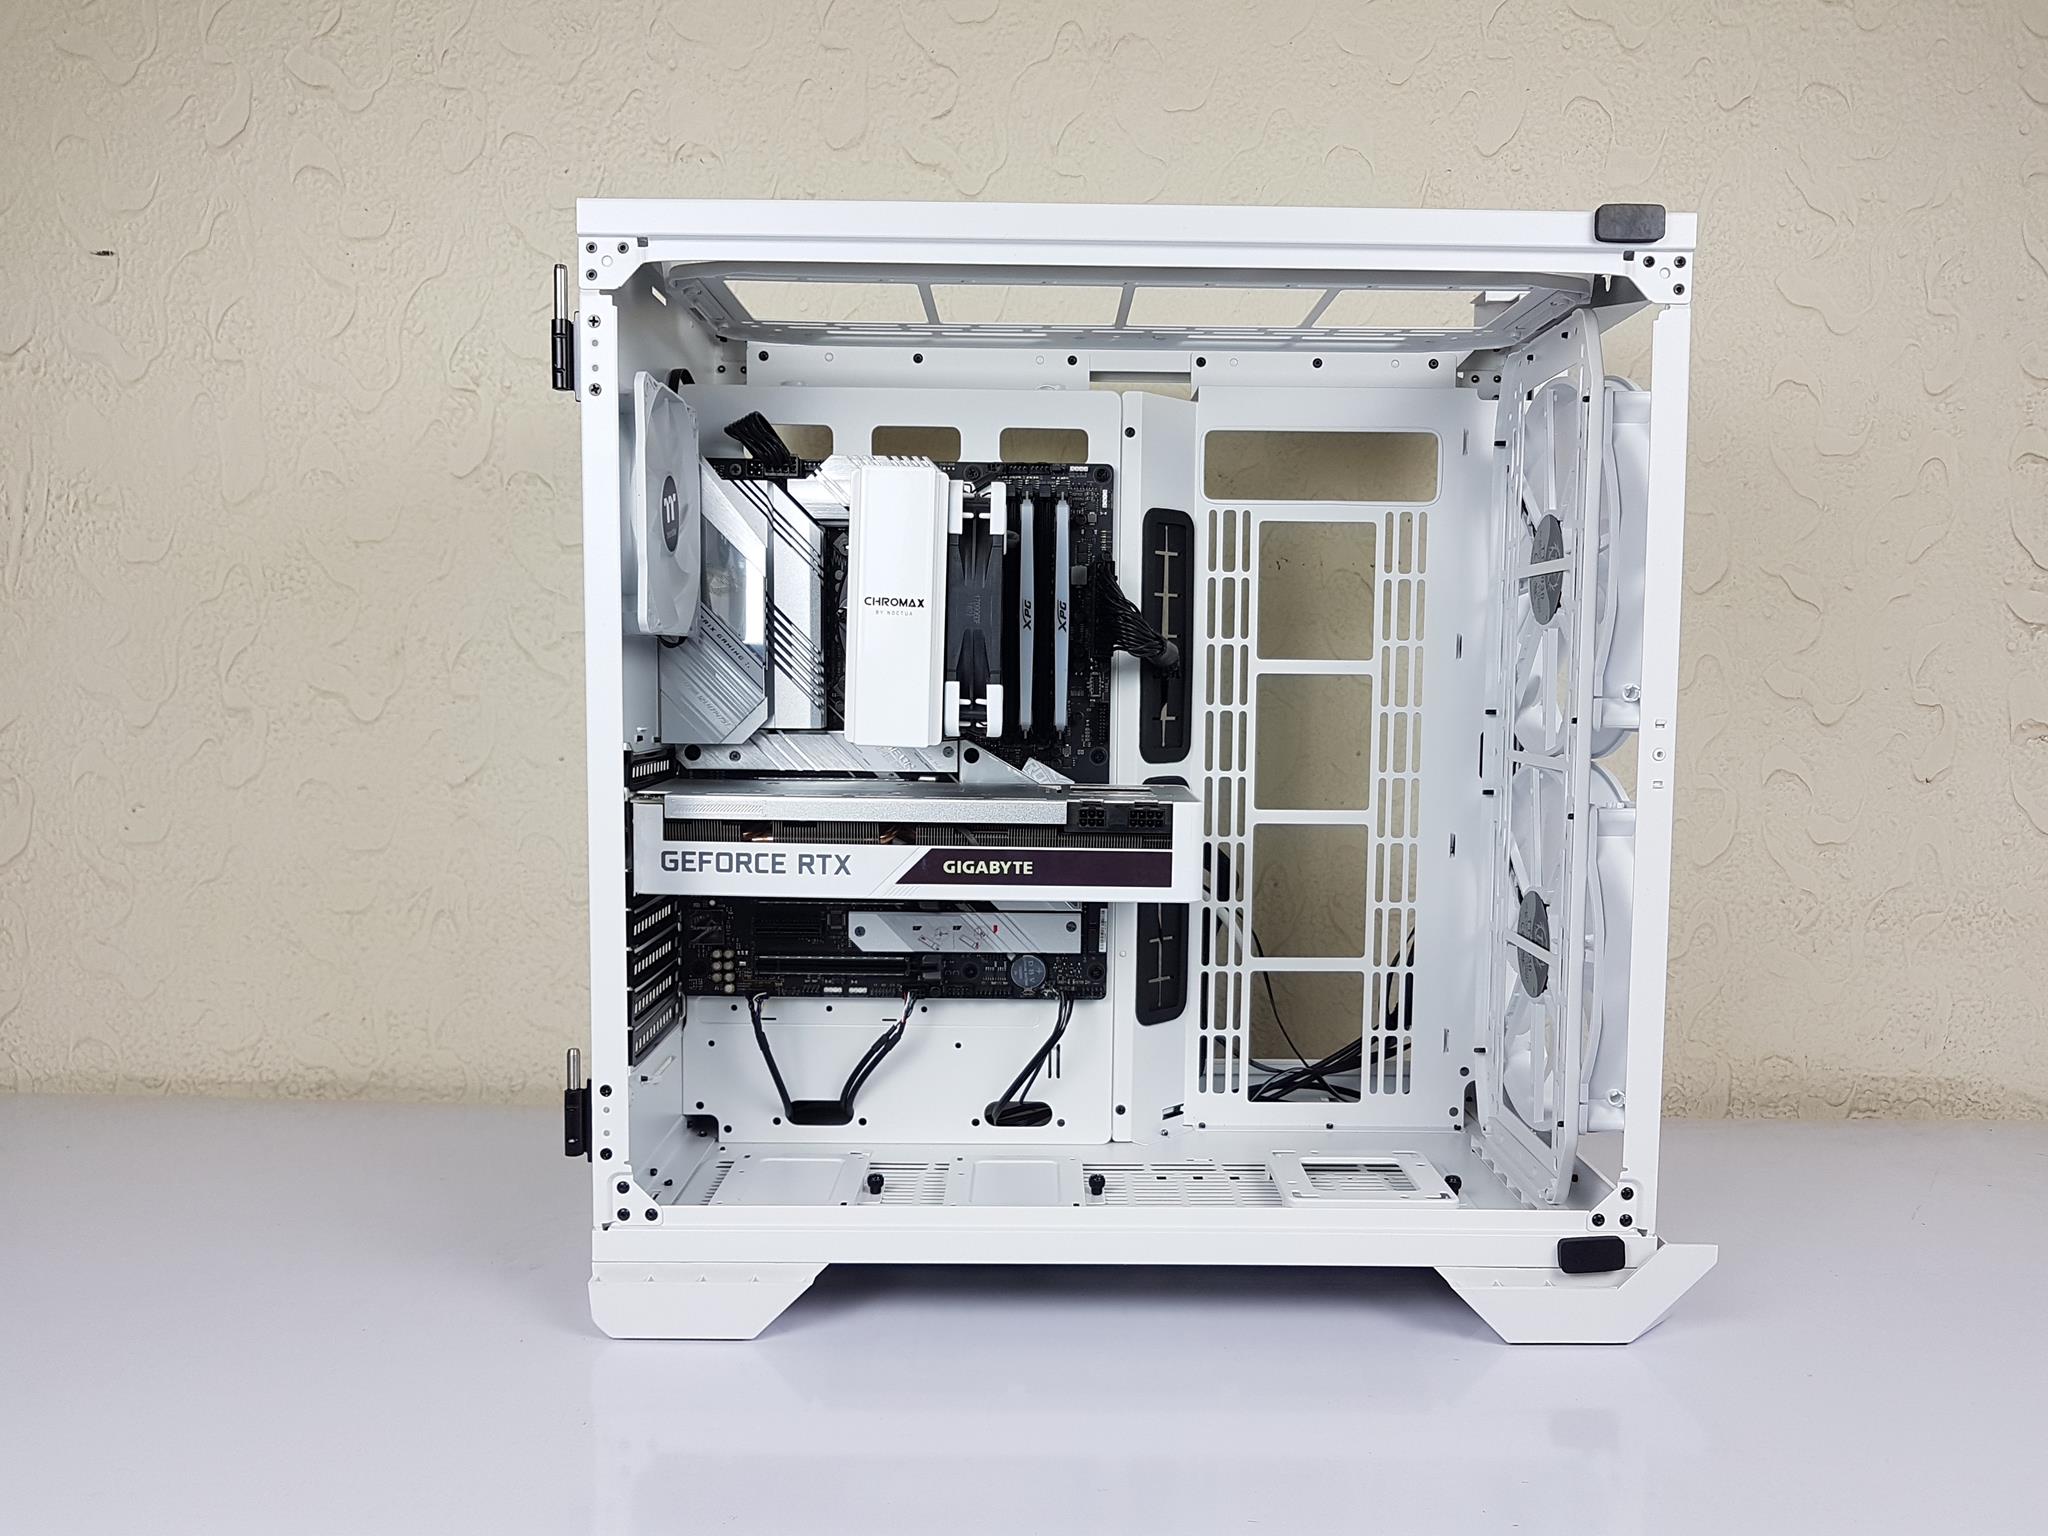 thermaltake view Test Build and Experience EPS connector